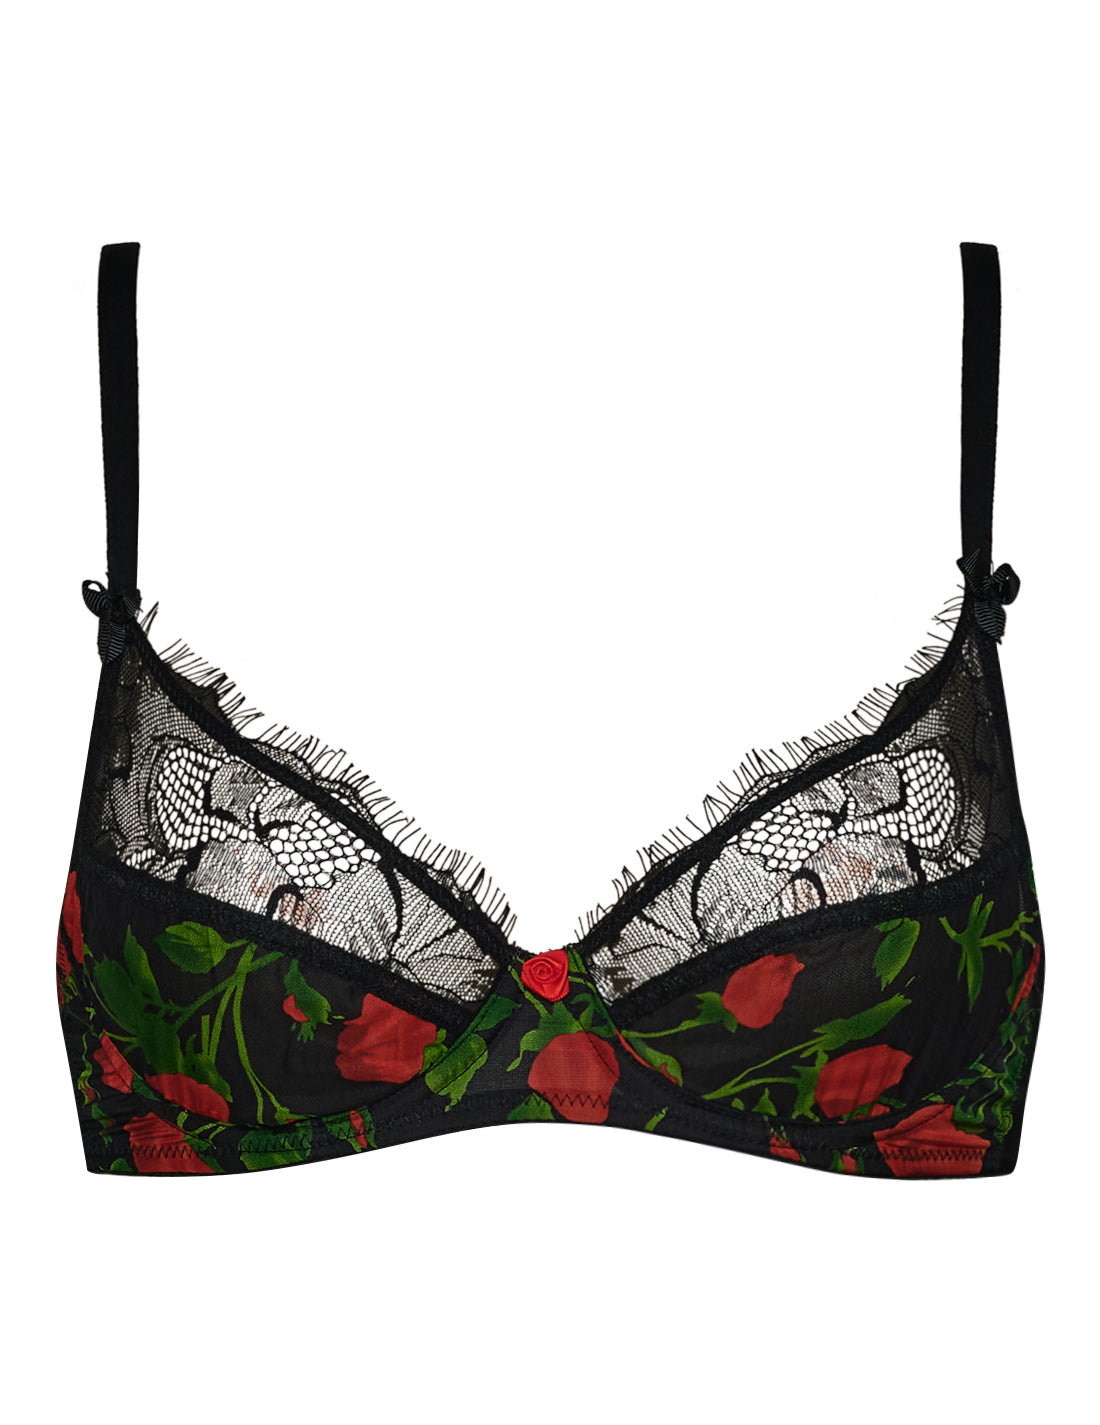 Luludi Indonesia - Are you looking for a super comfy bra to wear